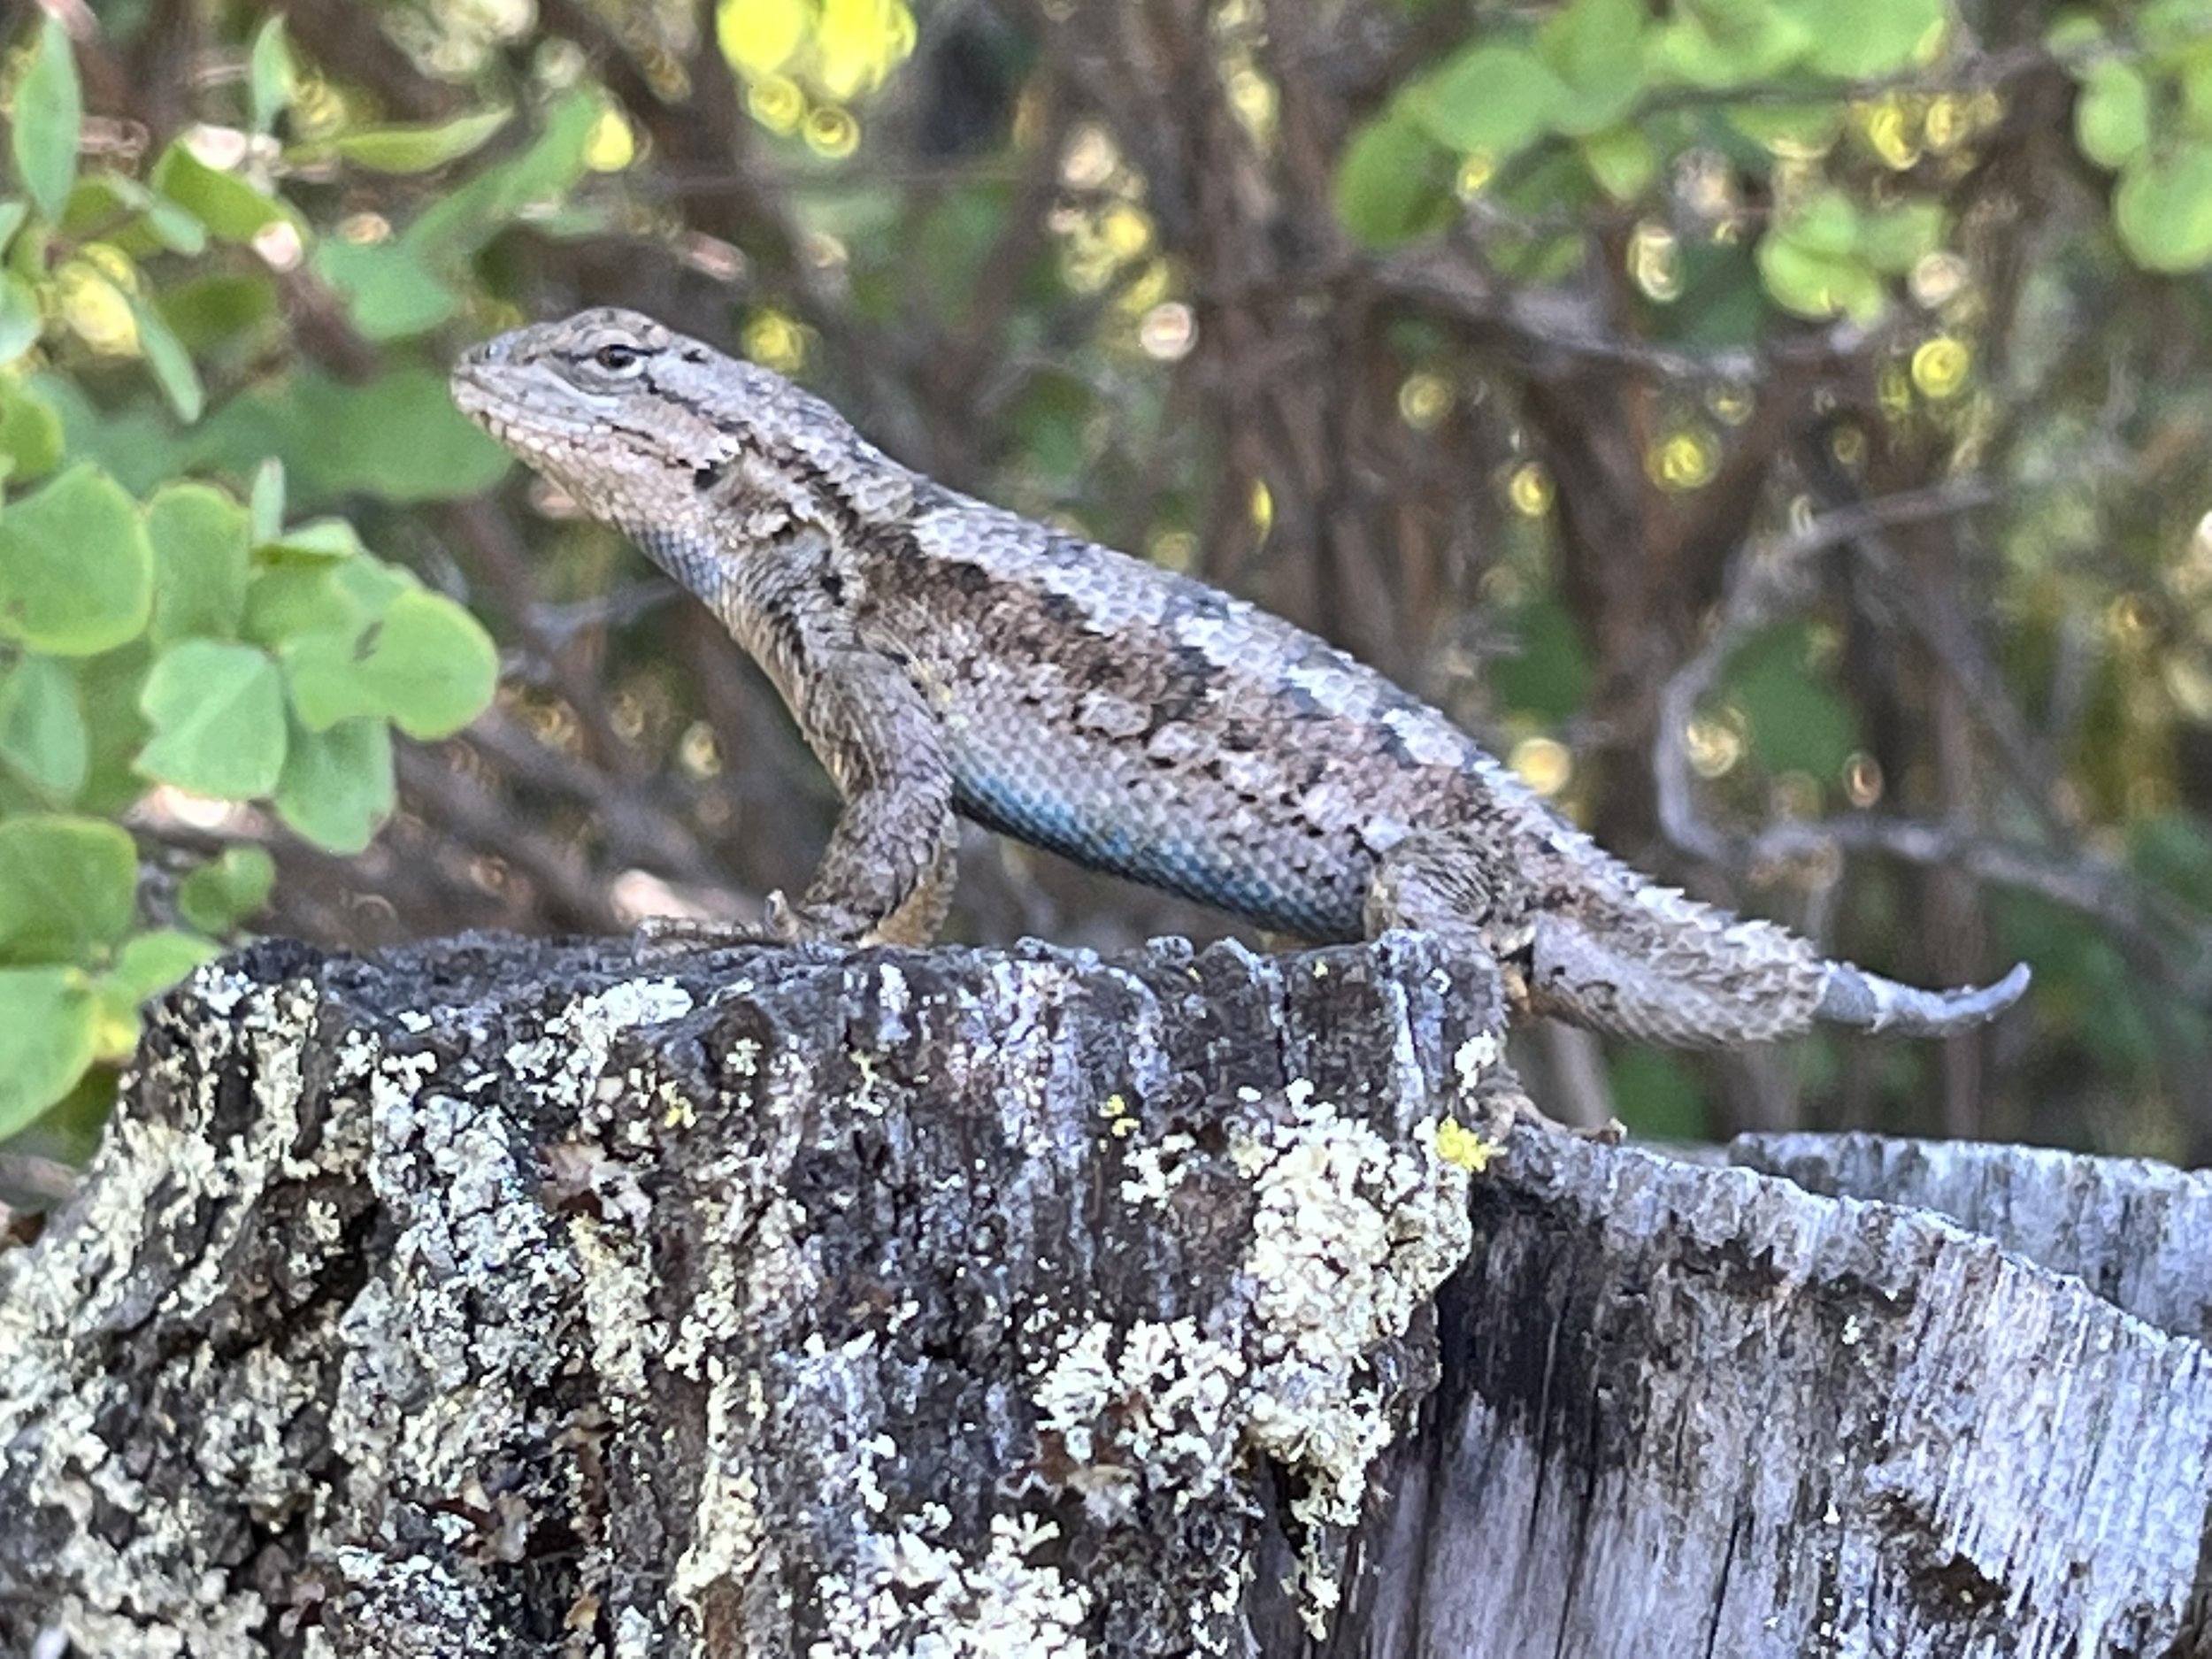  The Western Fence Lizard is the most commonly seen reptile in this area. This one is regenerating its tail. 